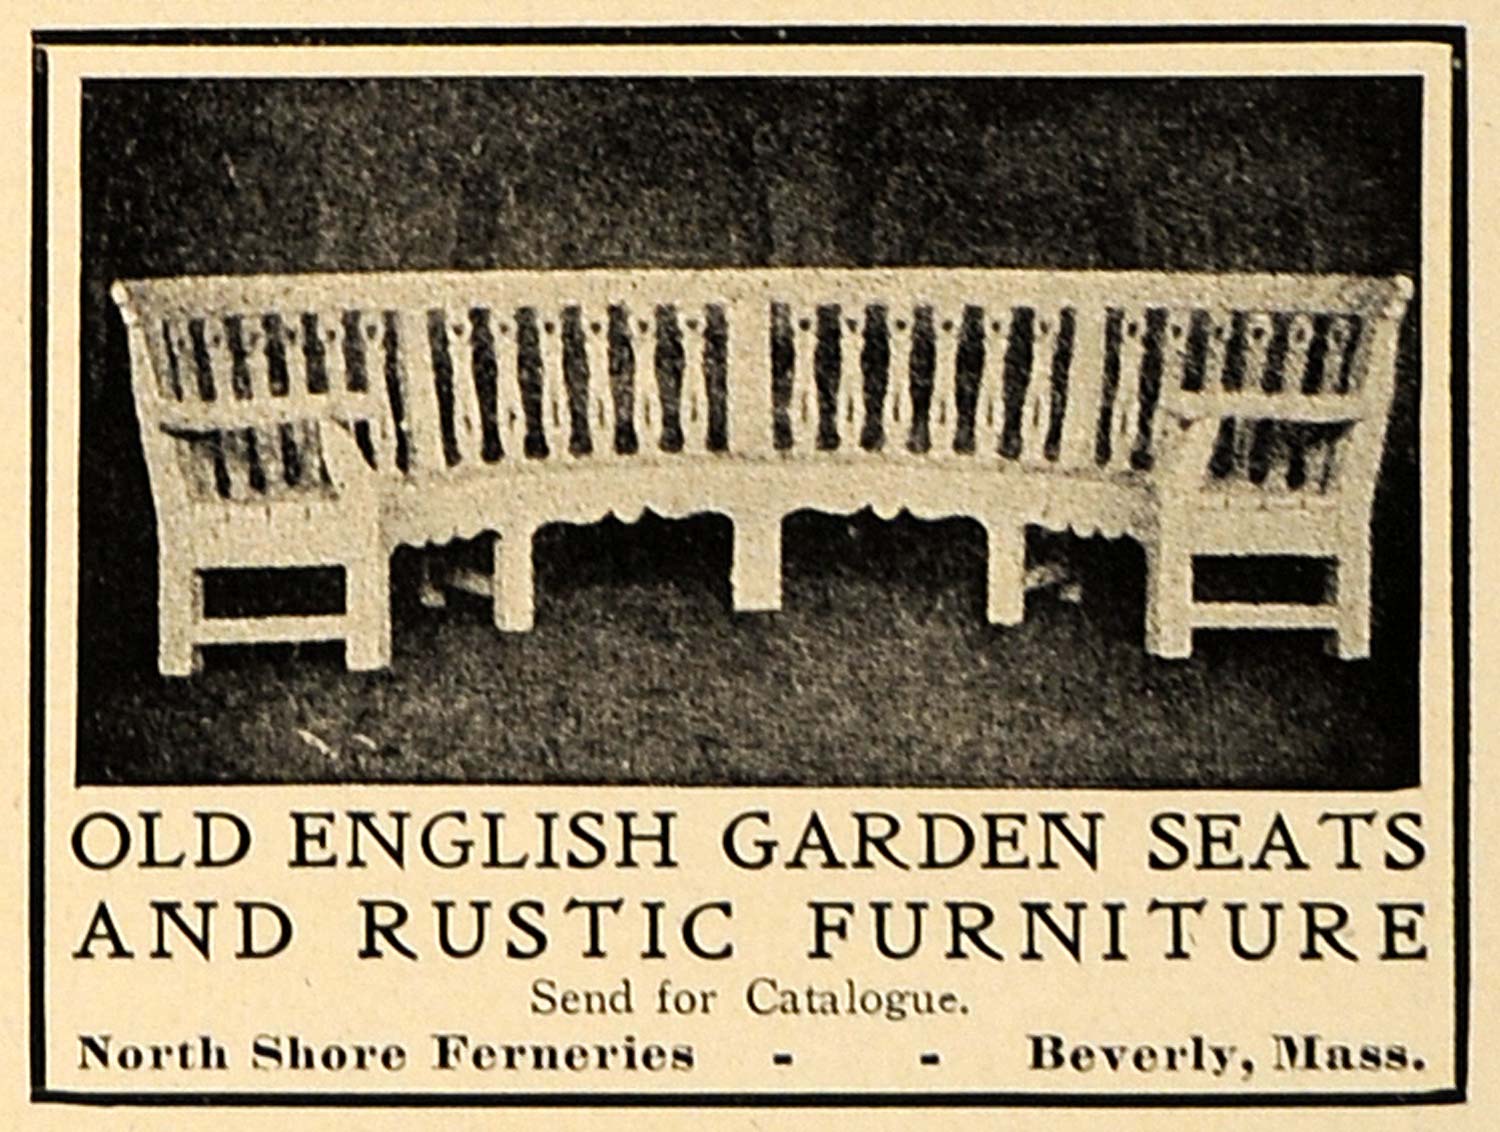 1906 Ad North Shore Ferneries Old English Furniture - ORIGINAL ADVERTISING CL9